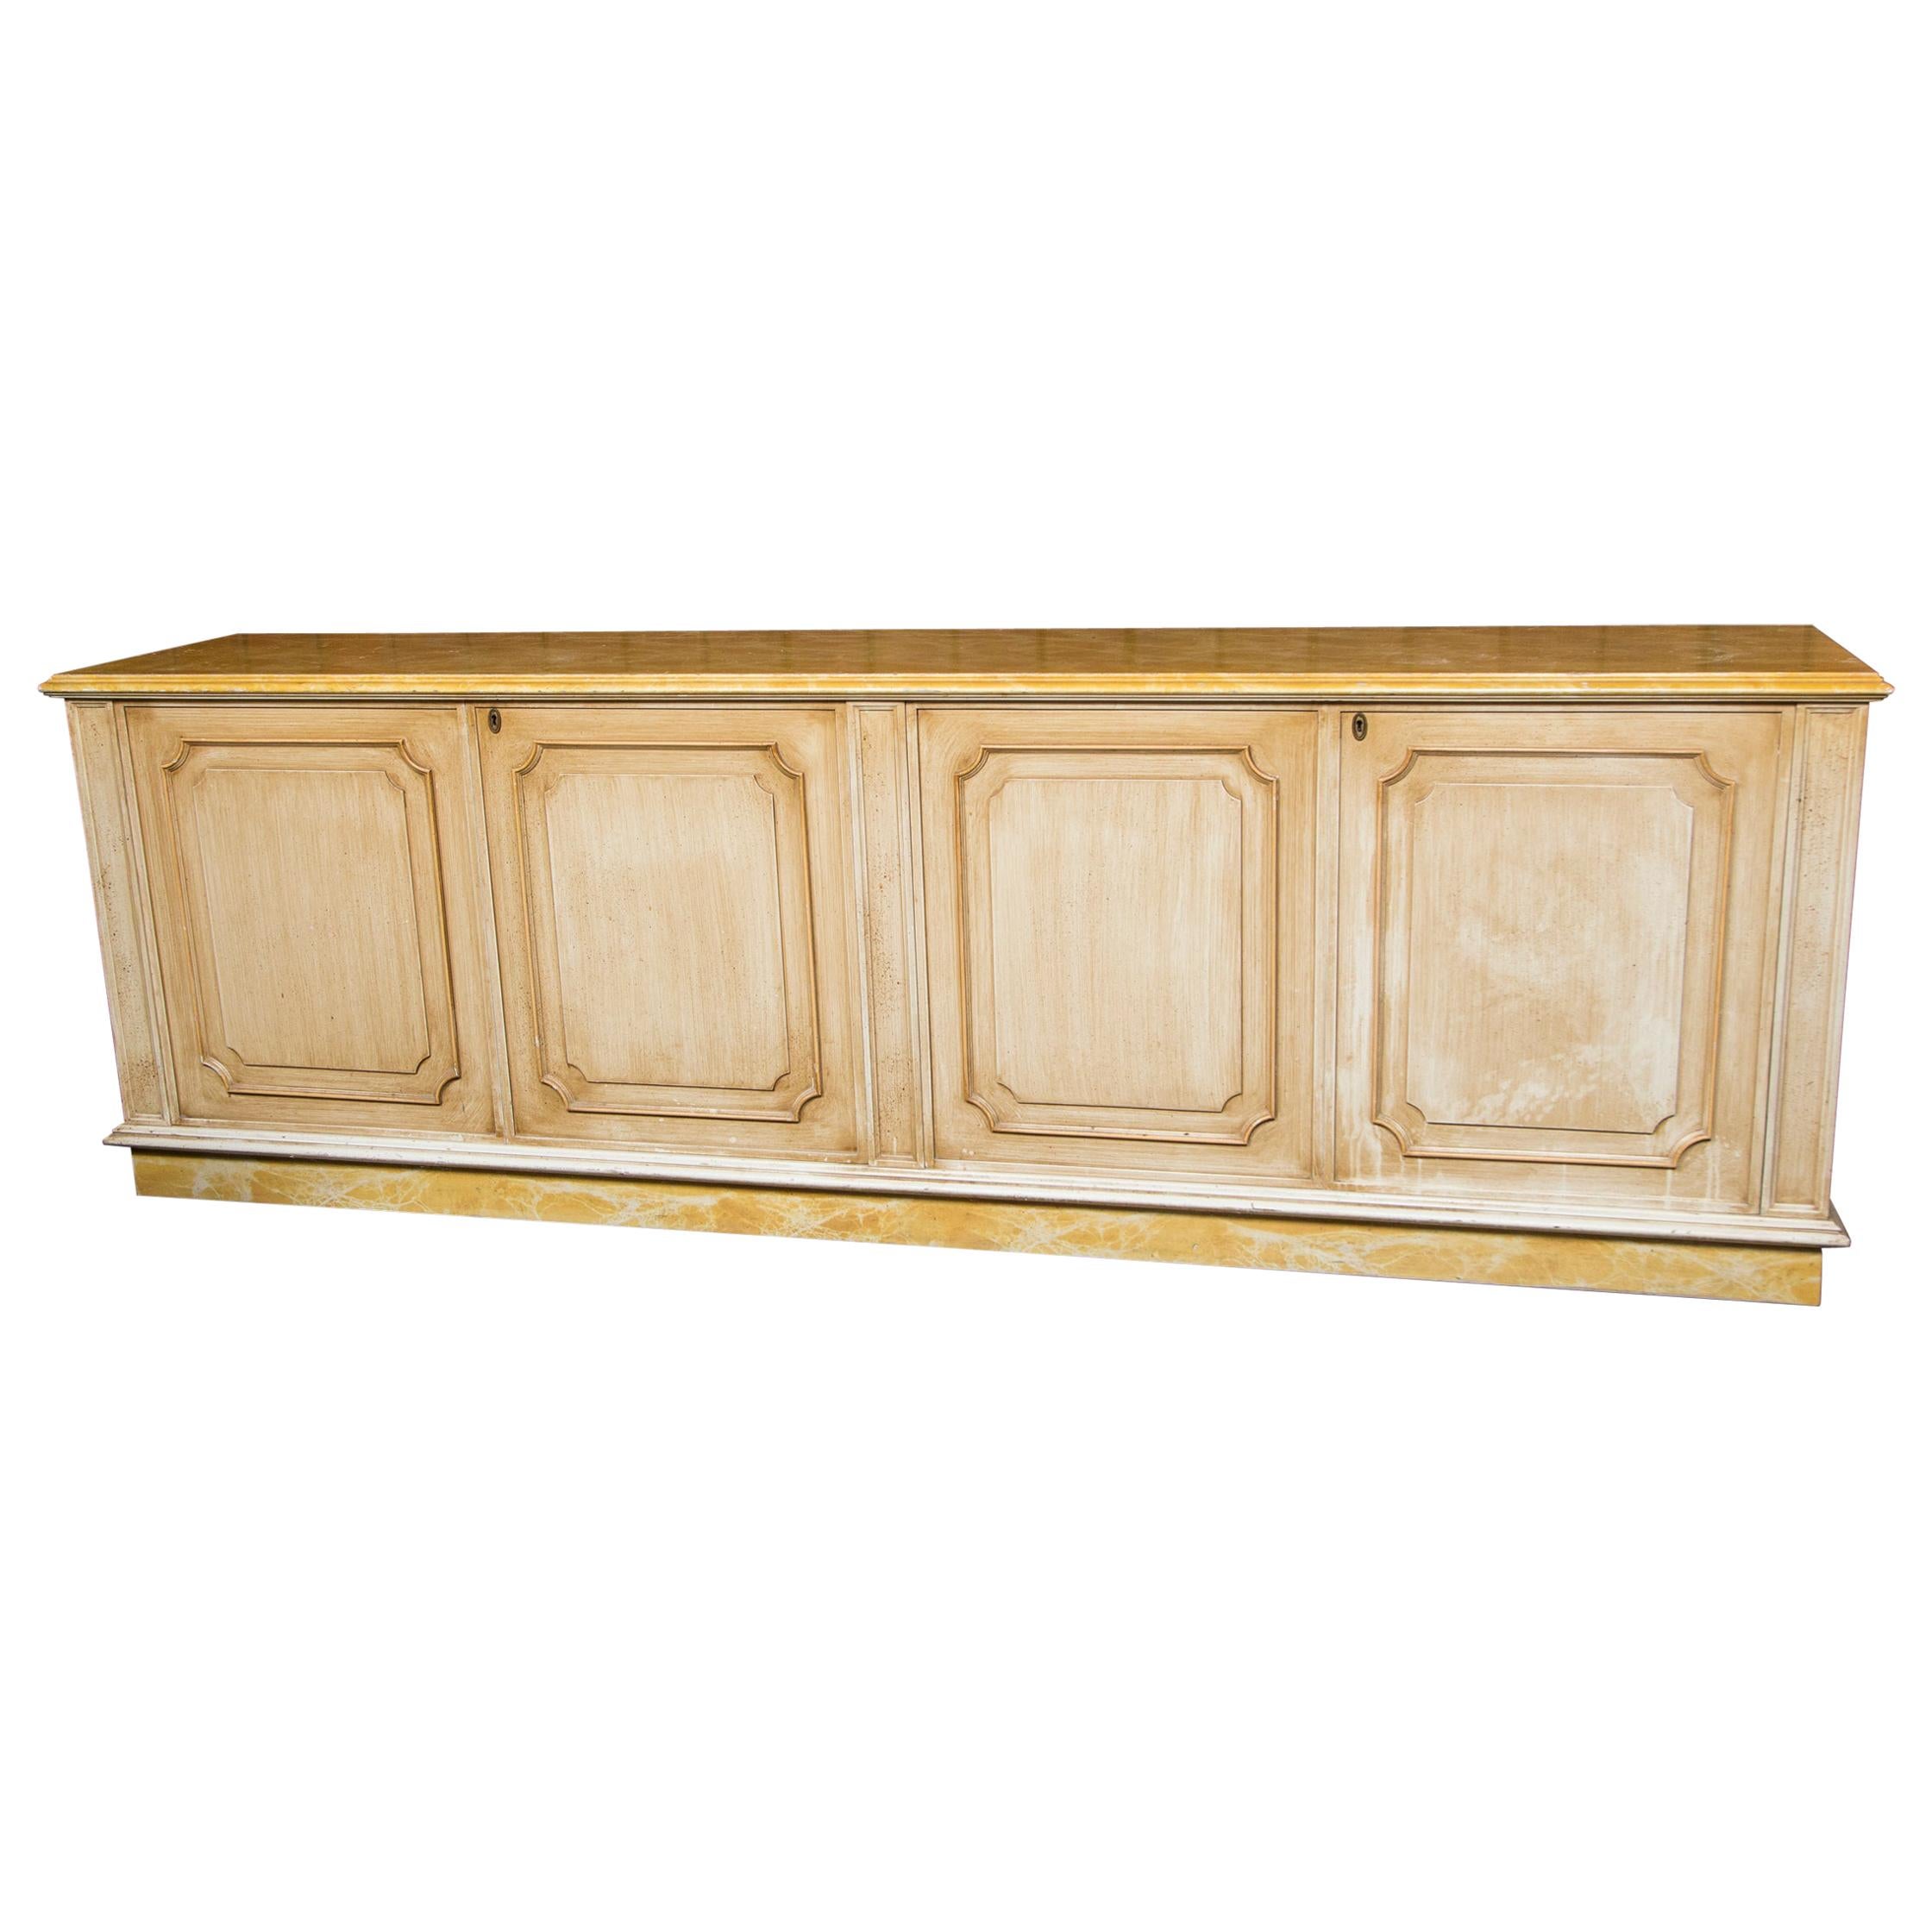 Painted Wood Four-Door Credenza, France